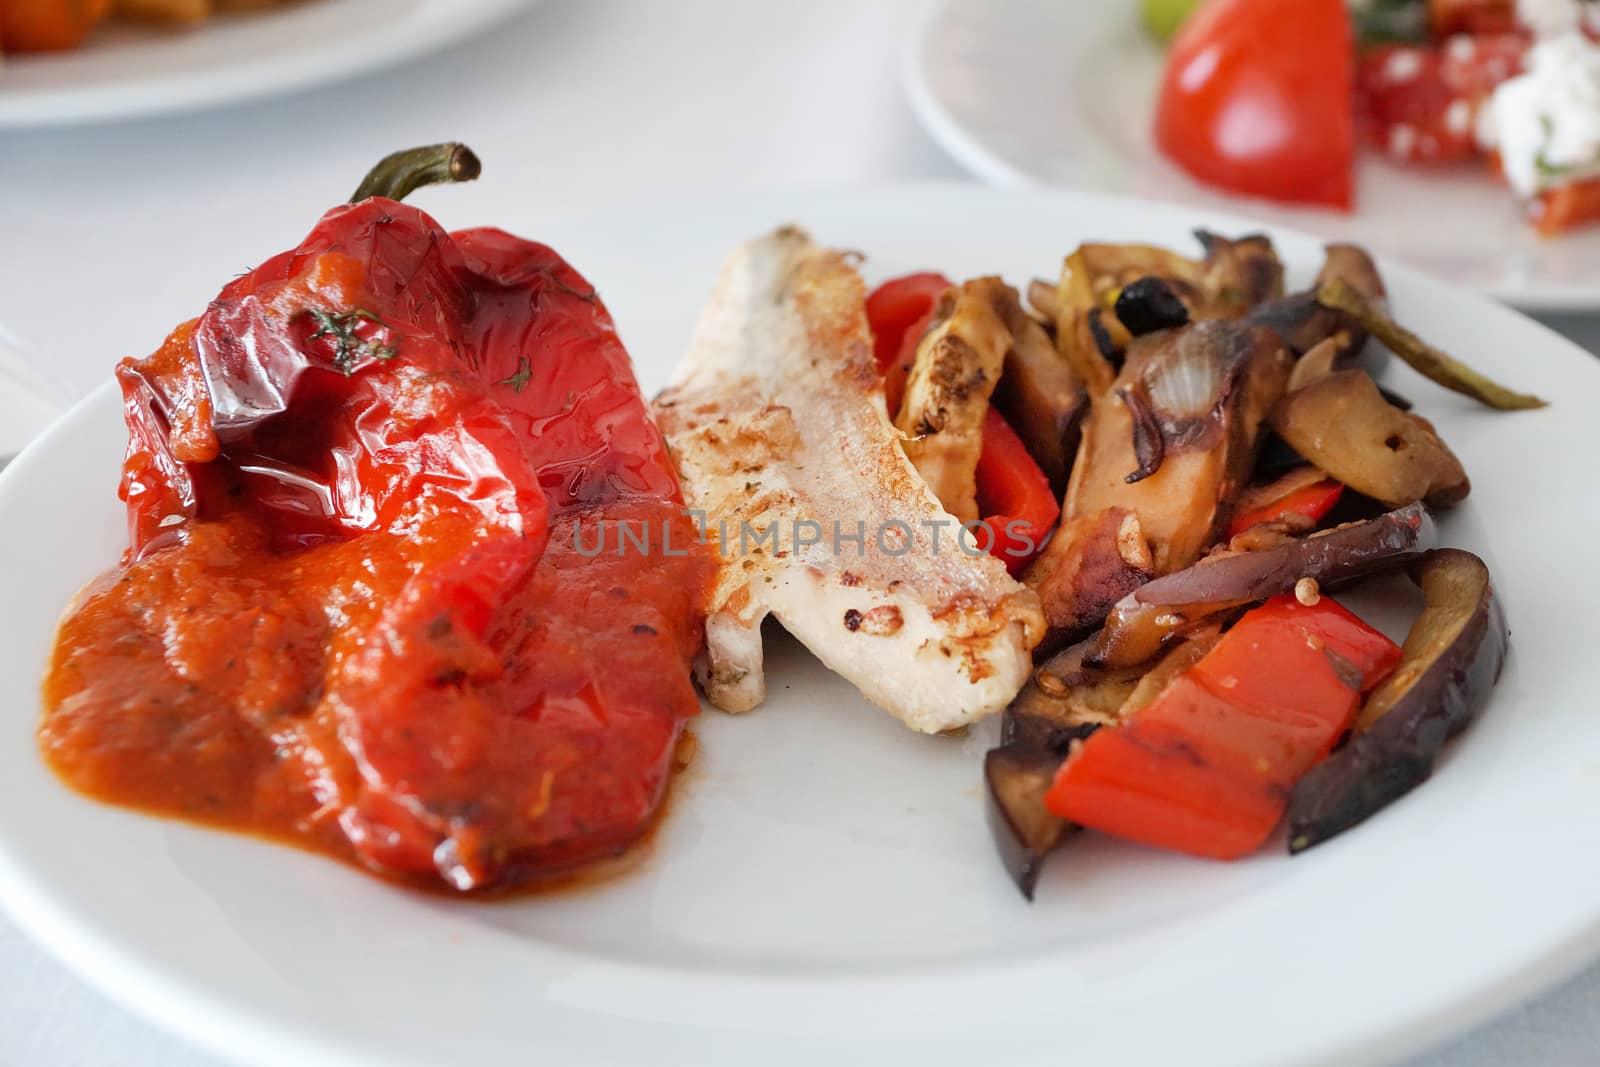 fish fillet with baked peppers and vegetables on a plate close-up